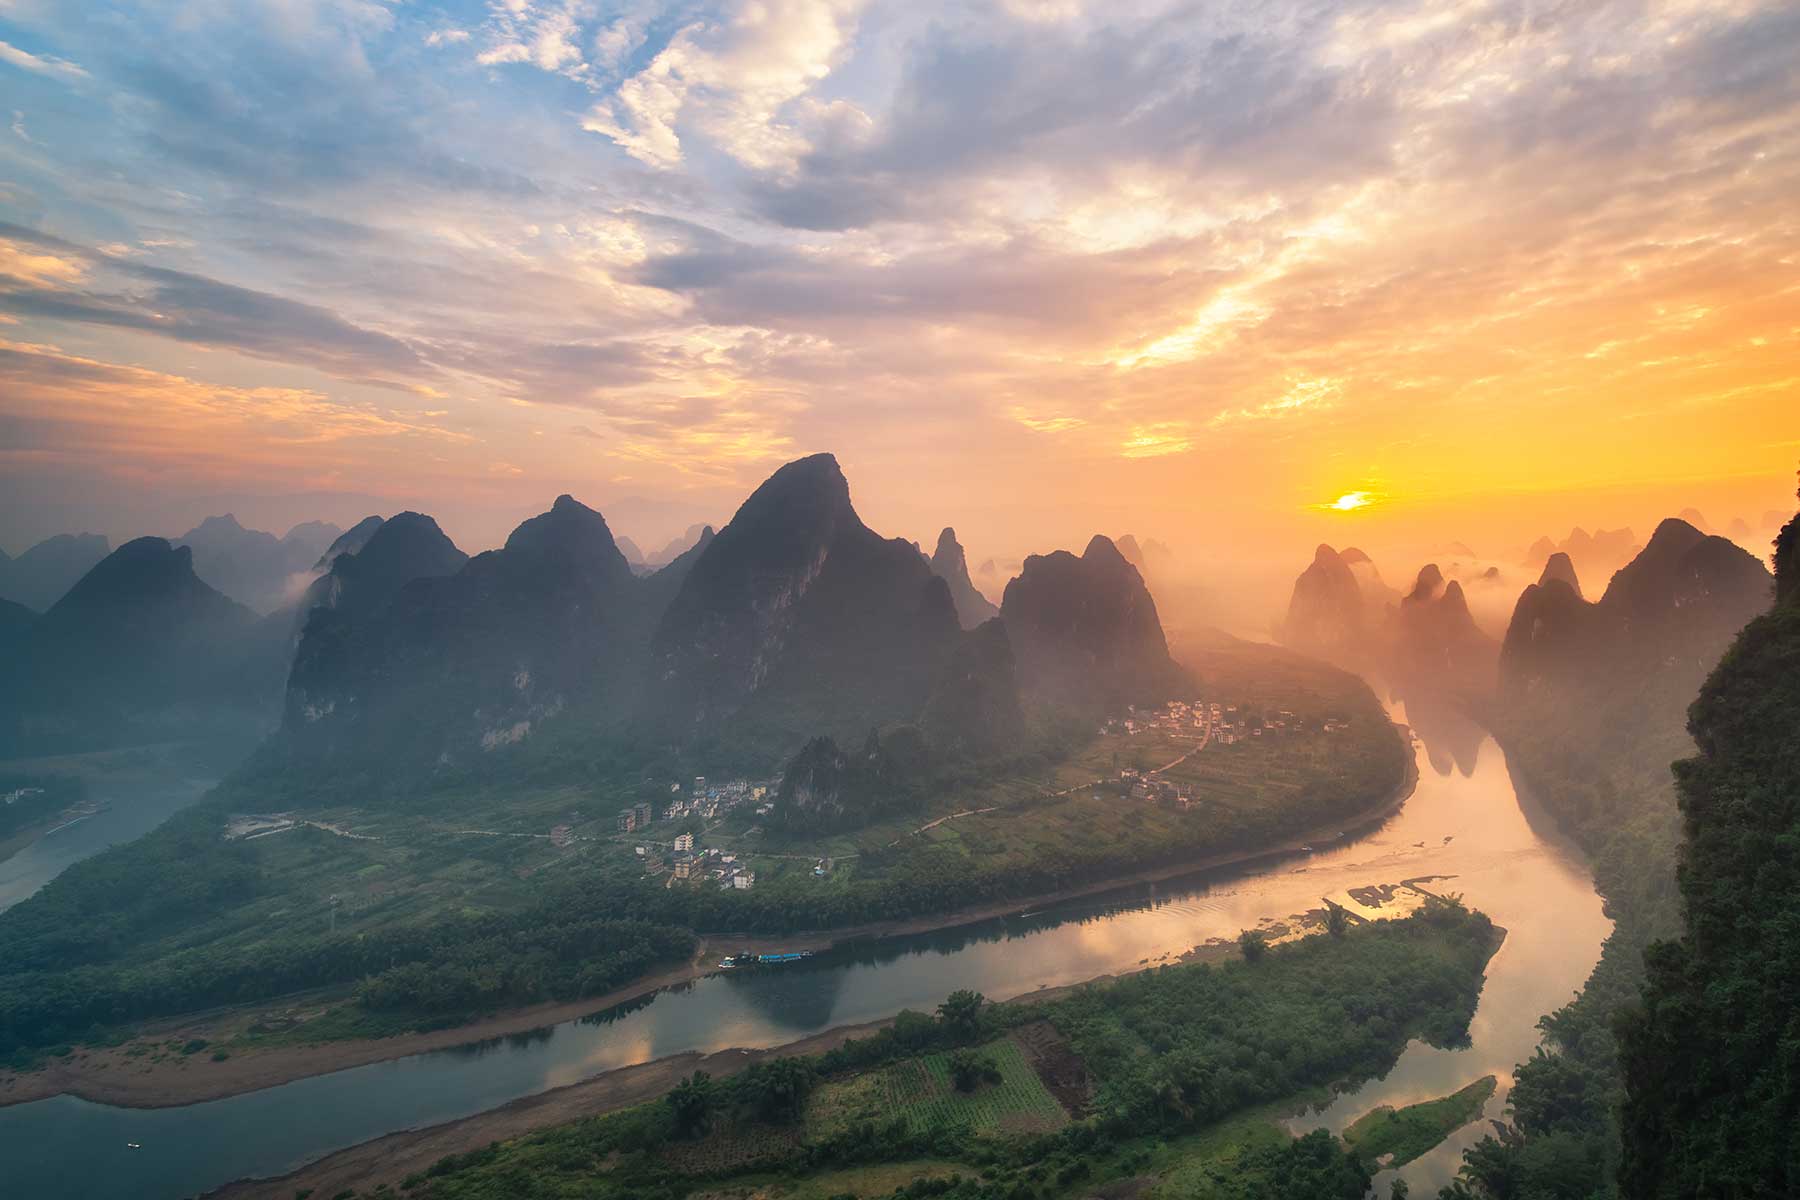 4 Days Guilin Yangshuo Classic Tour - China Travel Planner